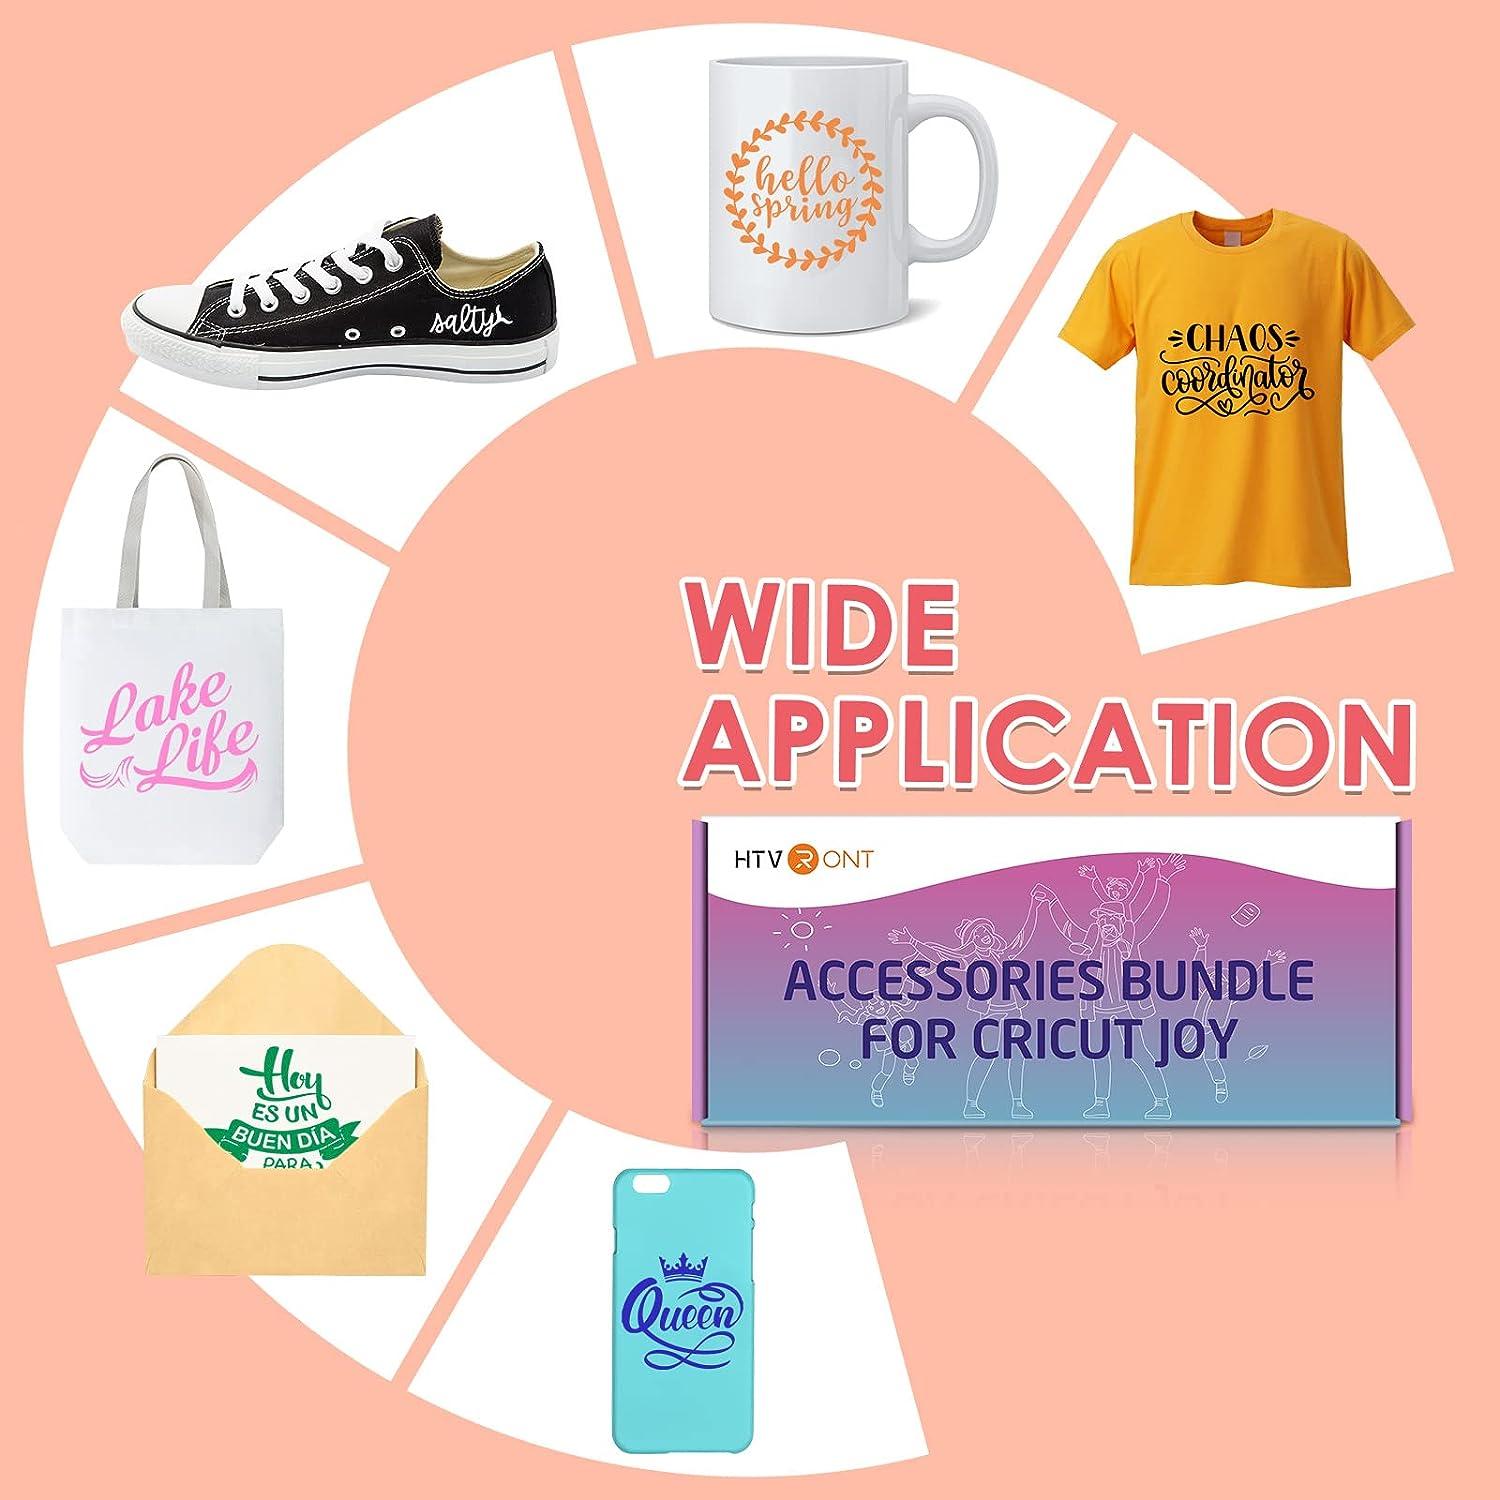 HTVRONT Accessories Bundle for Cricut Joy and Supplies Include Weeding  Tools, Heat Transfer, Adhensive Vinyl Sheets for Starter Kit-38PCS